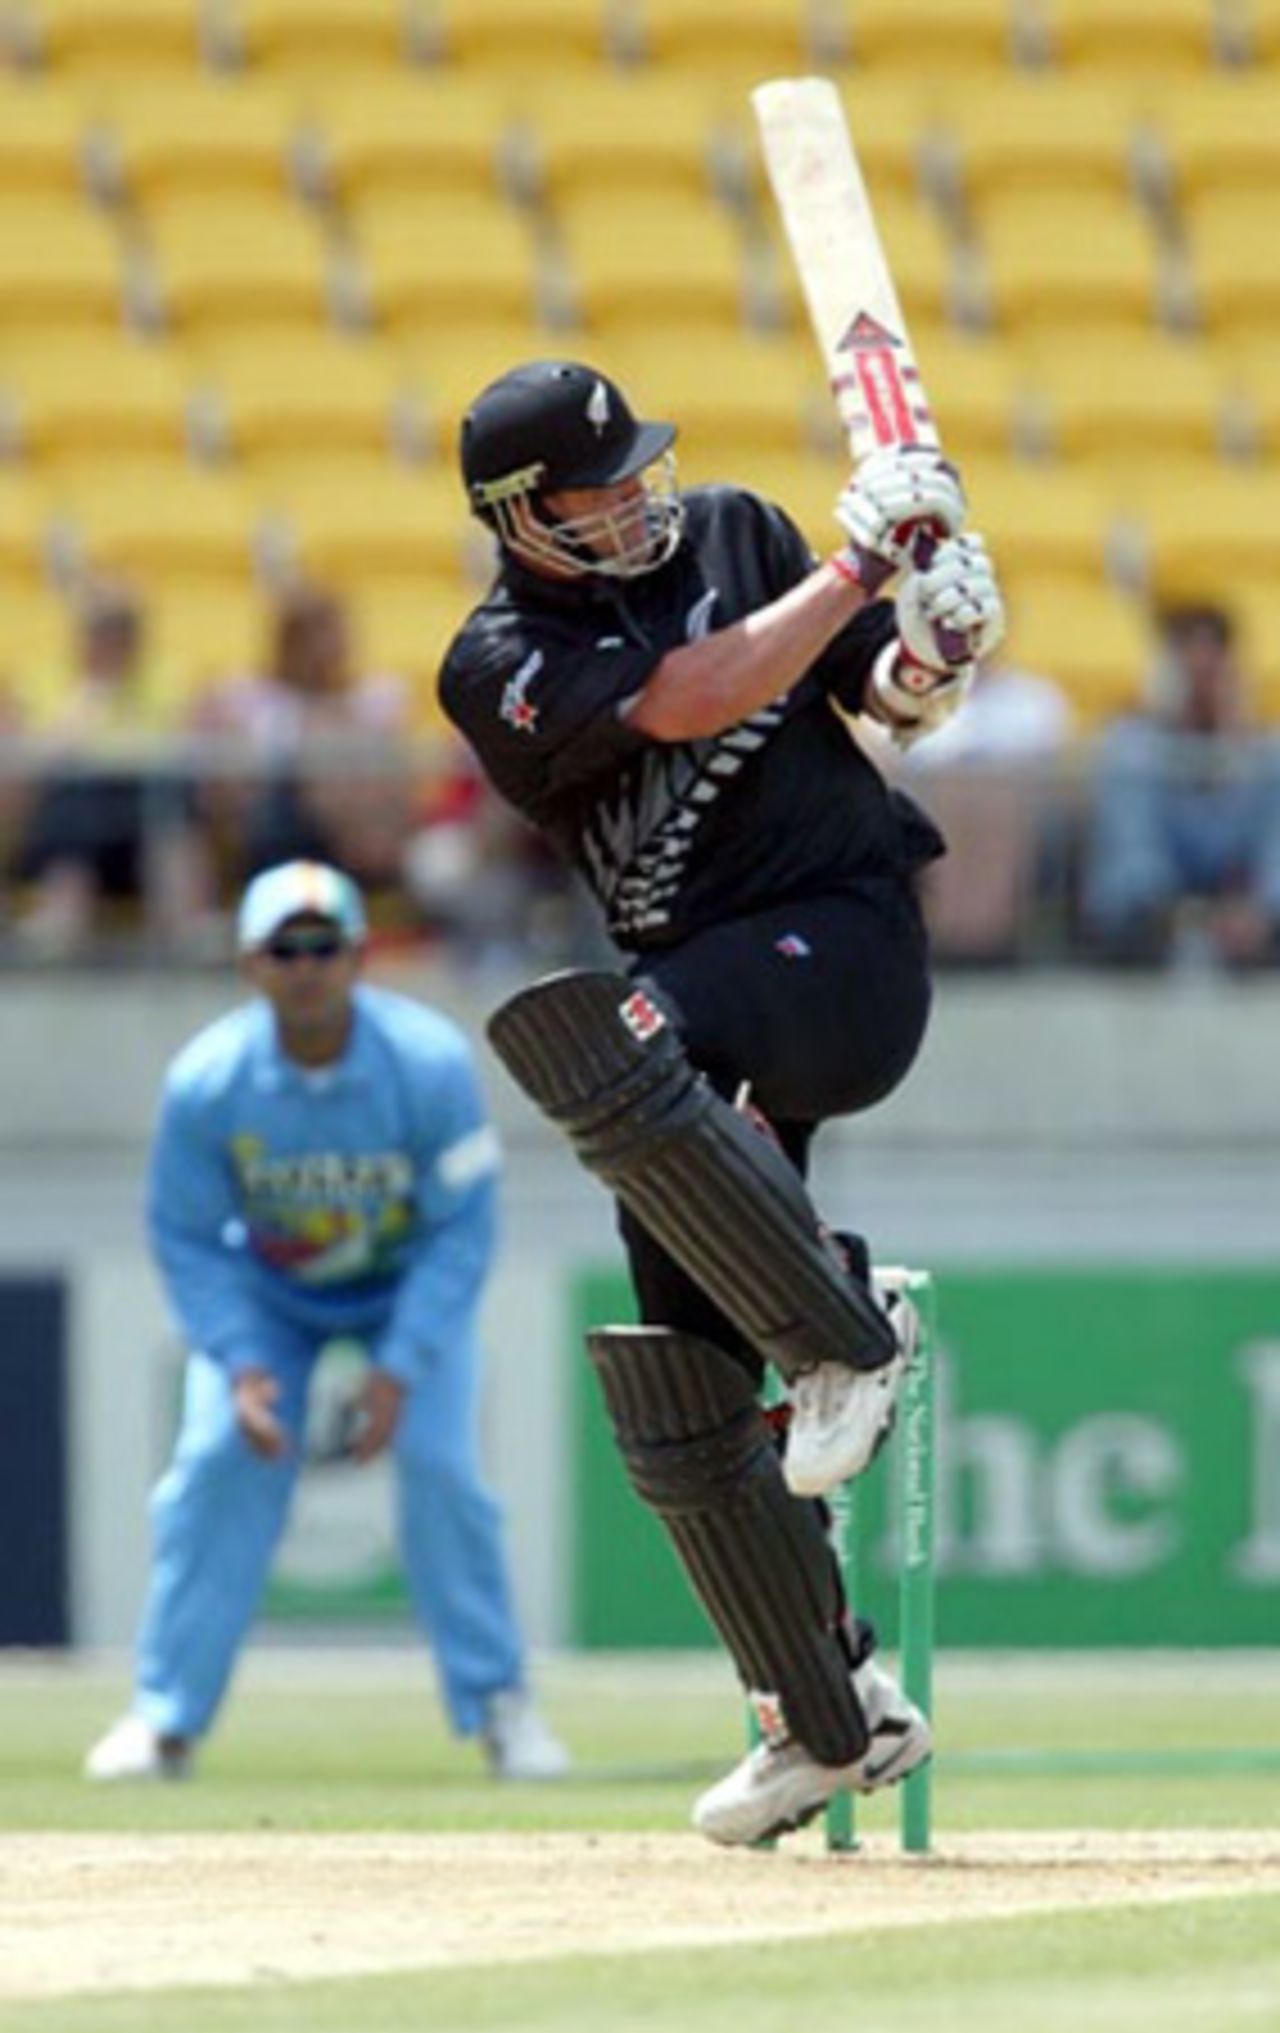 New Zealand batsman Chris Cairns pulls a delivery through square leg during his innings of 25. Indian slip fielder Virender Sehwag look on in the background. 5th ODI: New Zealand v India at Westpac Stadium, Wellington, 8 January 2003.